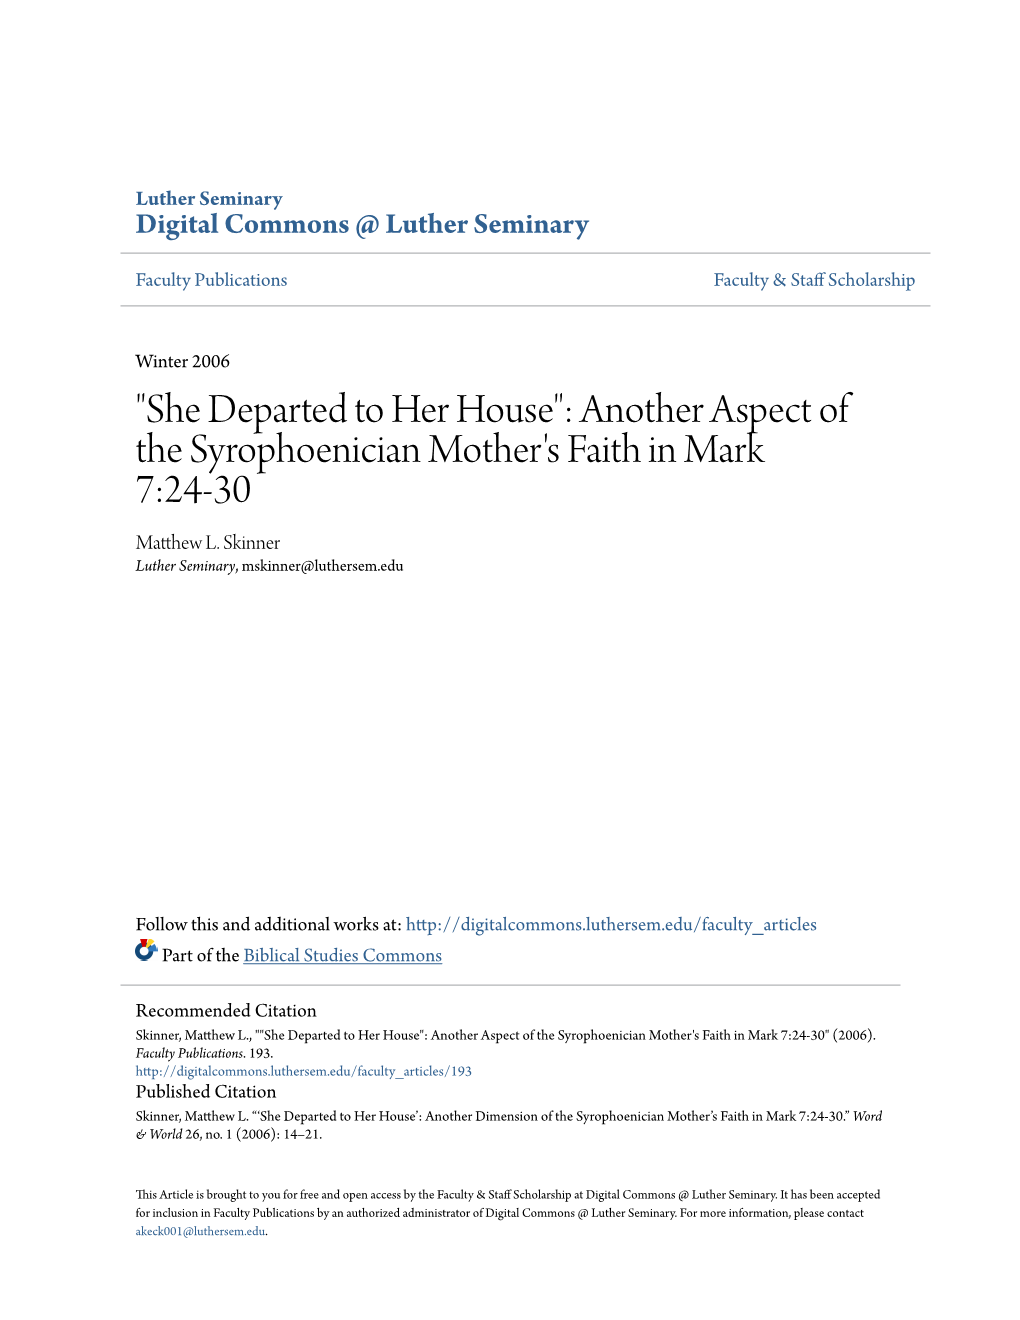 "She Departed to Her House": Another Aspect of the Syrophoenician Mother's Faith in Mark 7:24-30 Matthew L